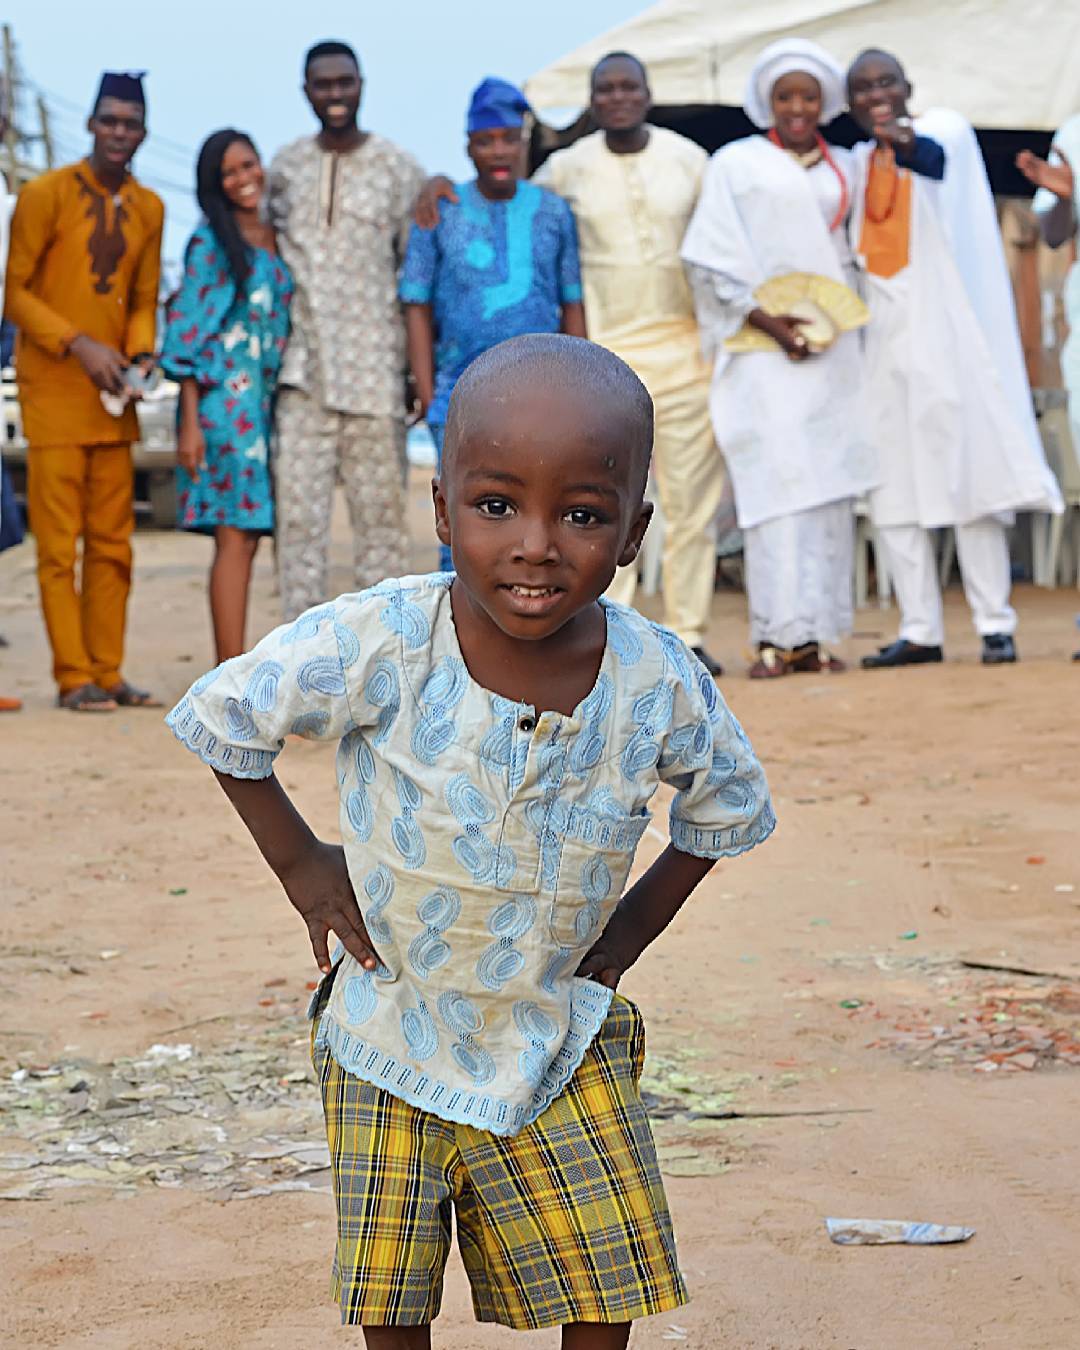 See The Photographer Behind The “Little Boy’s Photo Bomb”